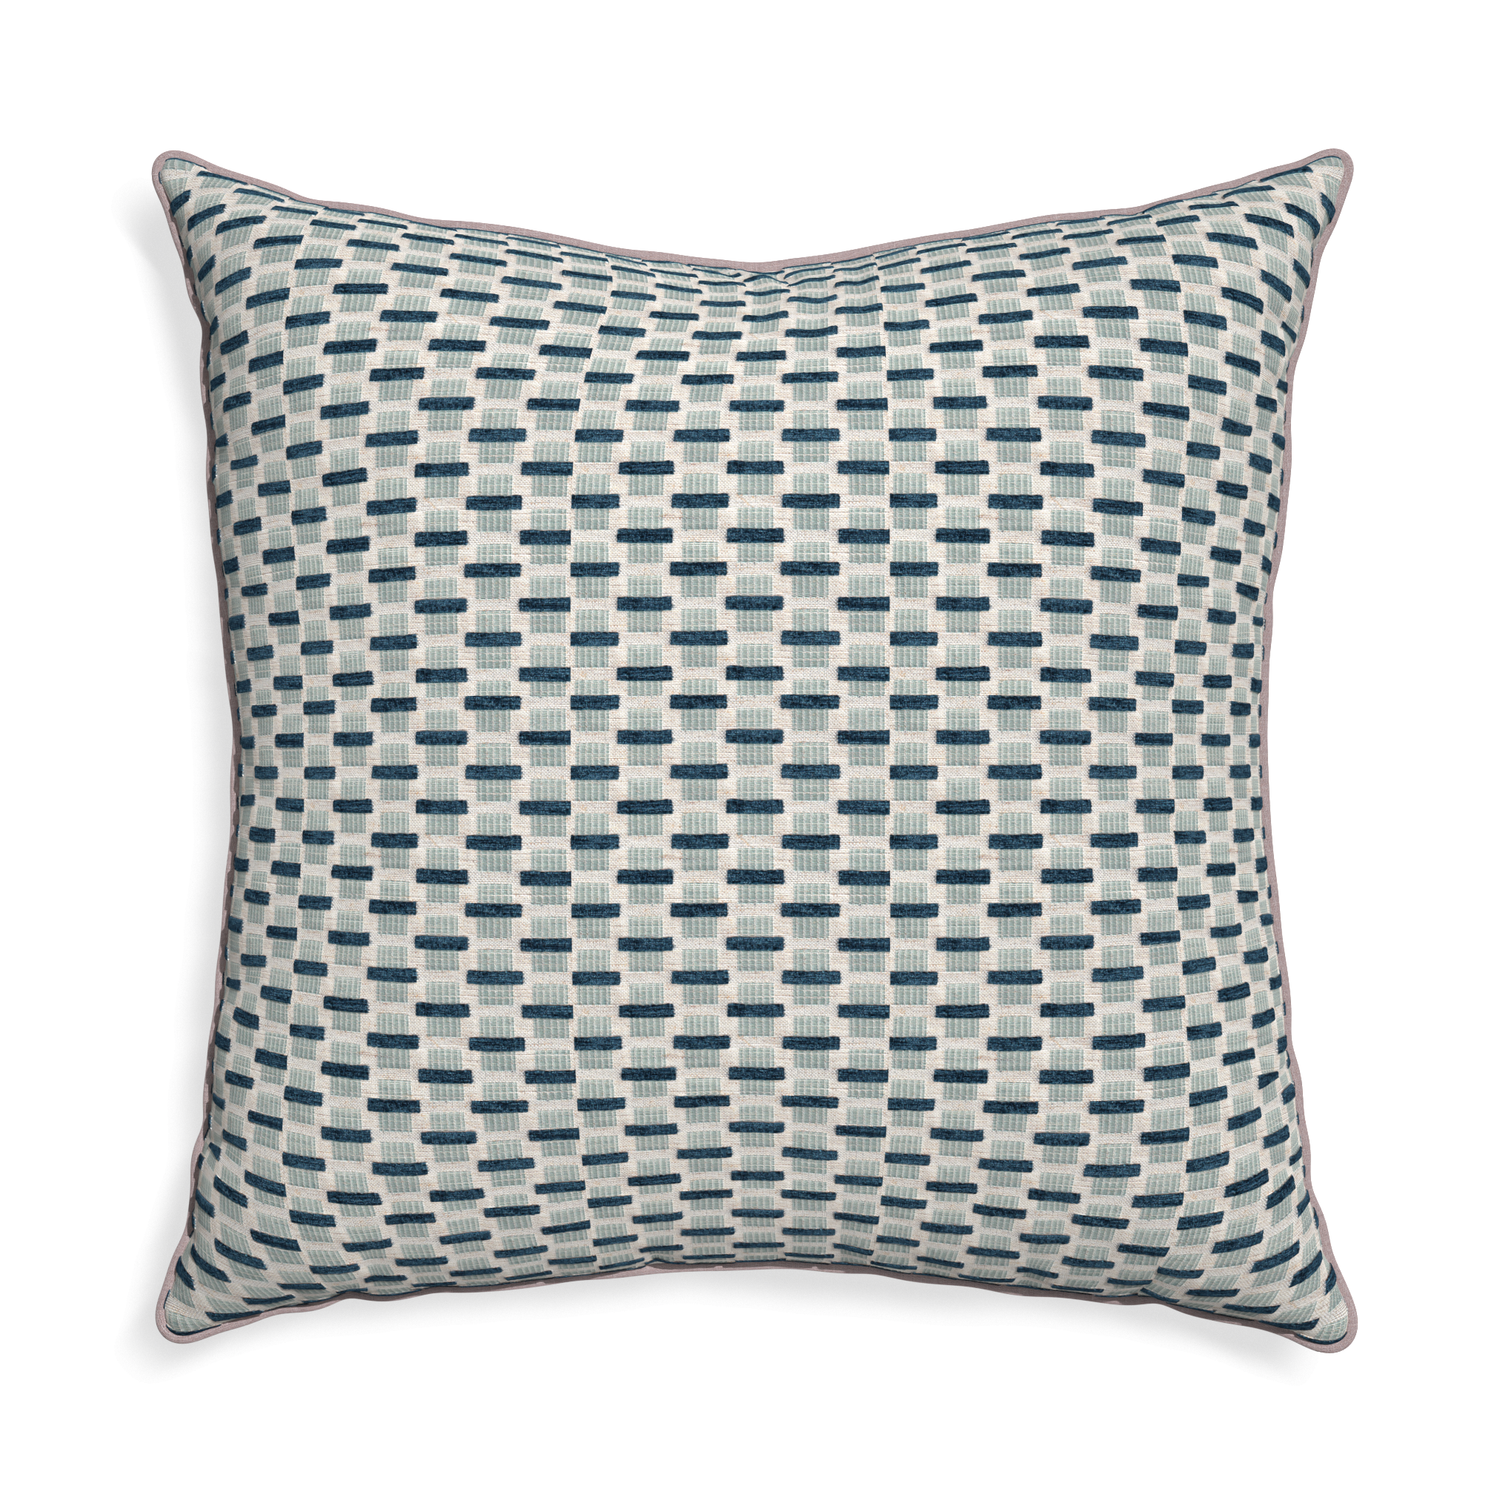 Euro-sham willow amalfi custom blue geometric chenillepillow with orchid piping on white background